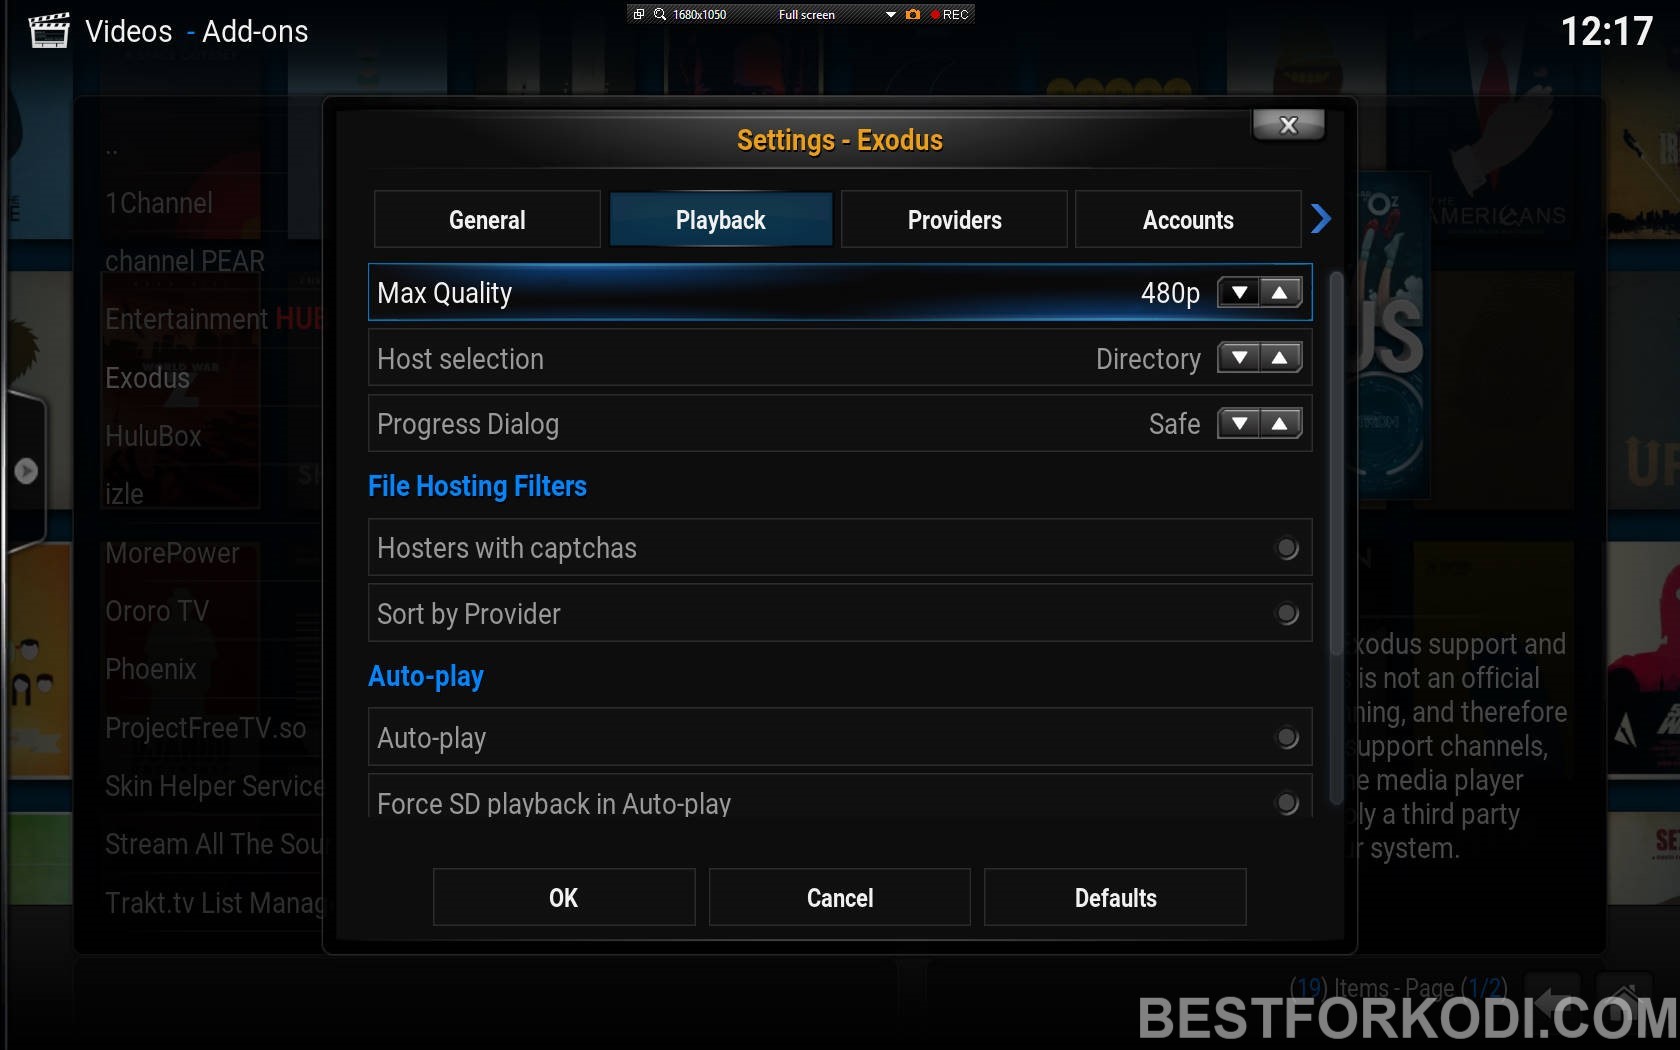 Using Kodi with Slower Internet Connection